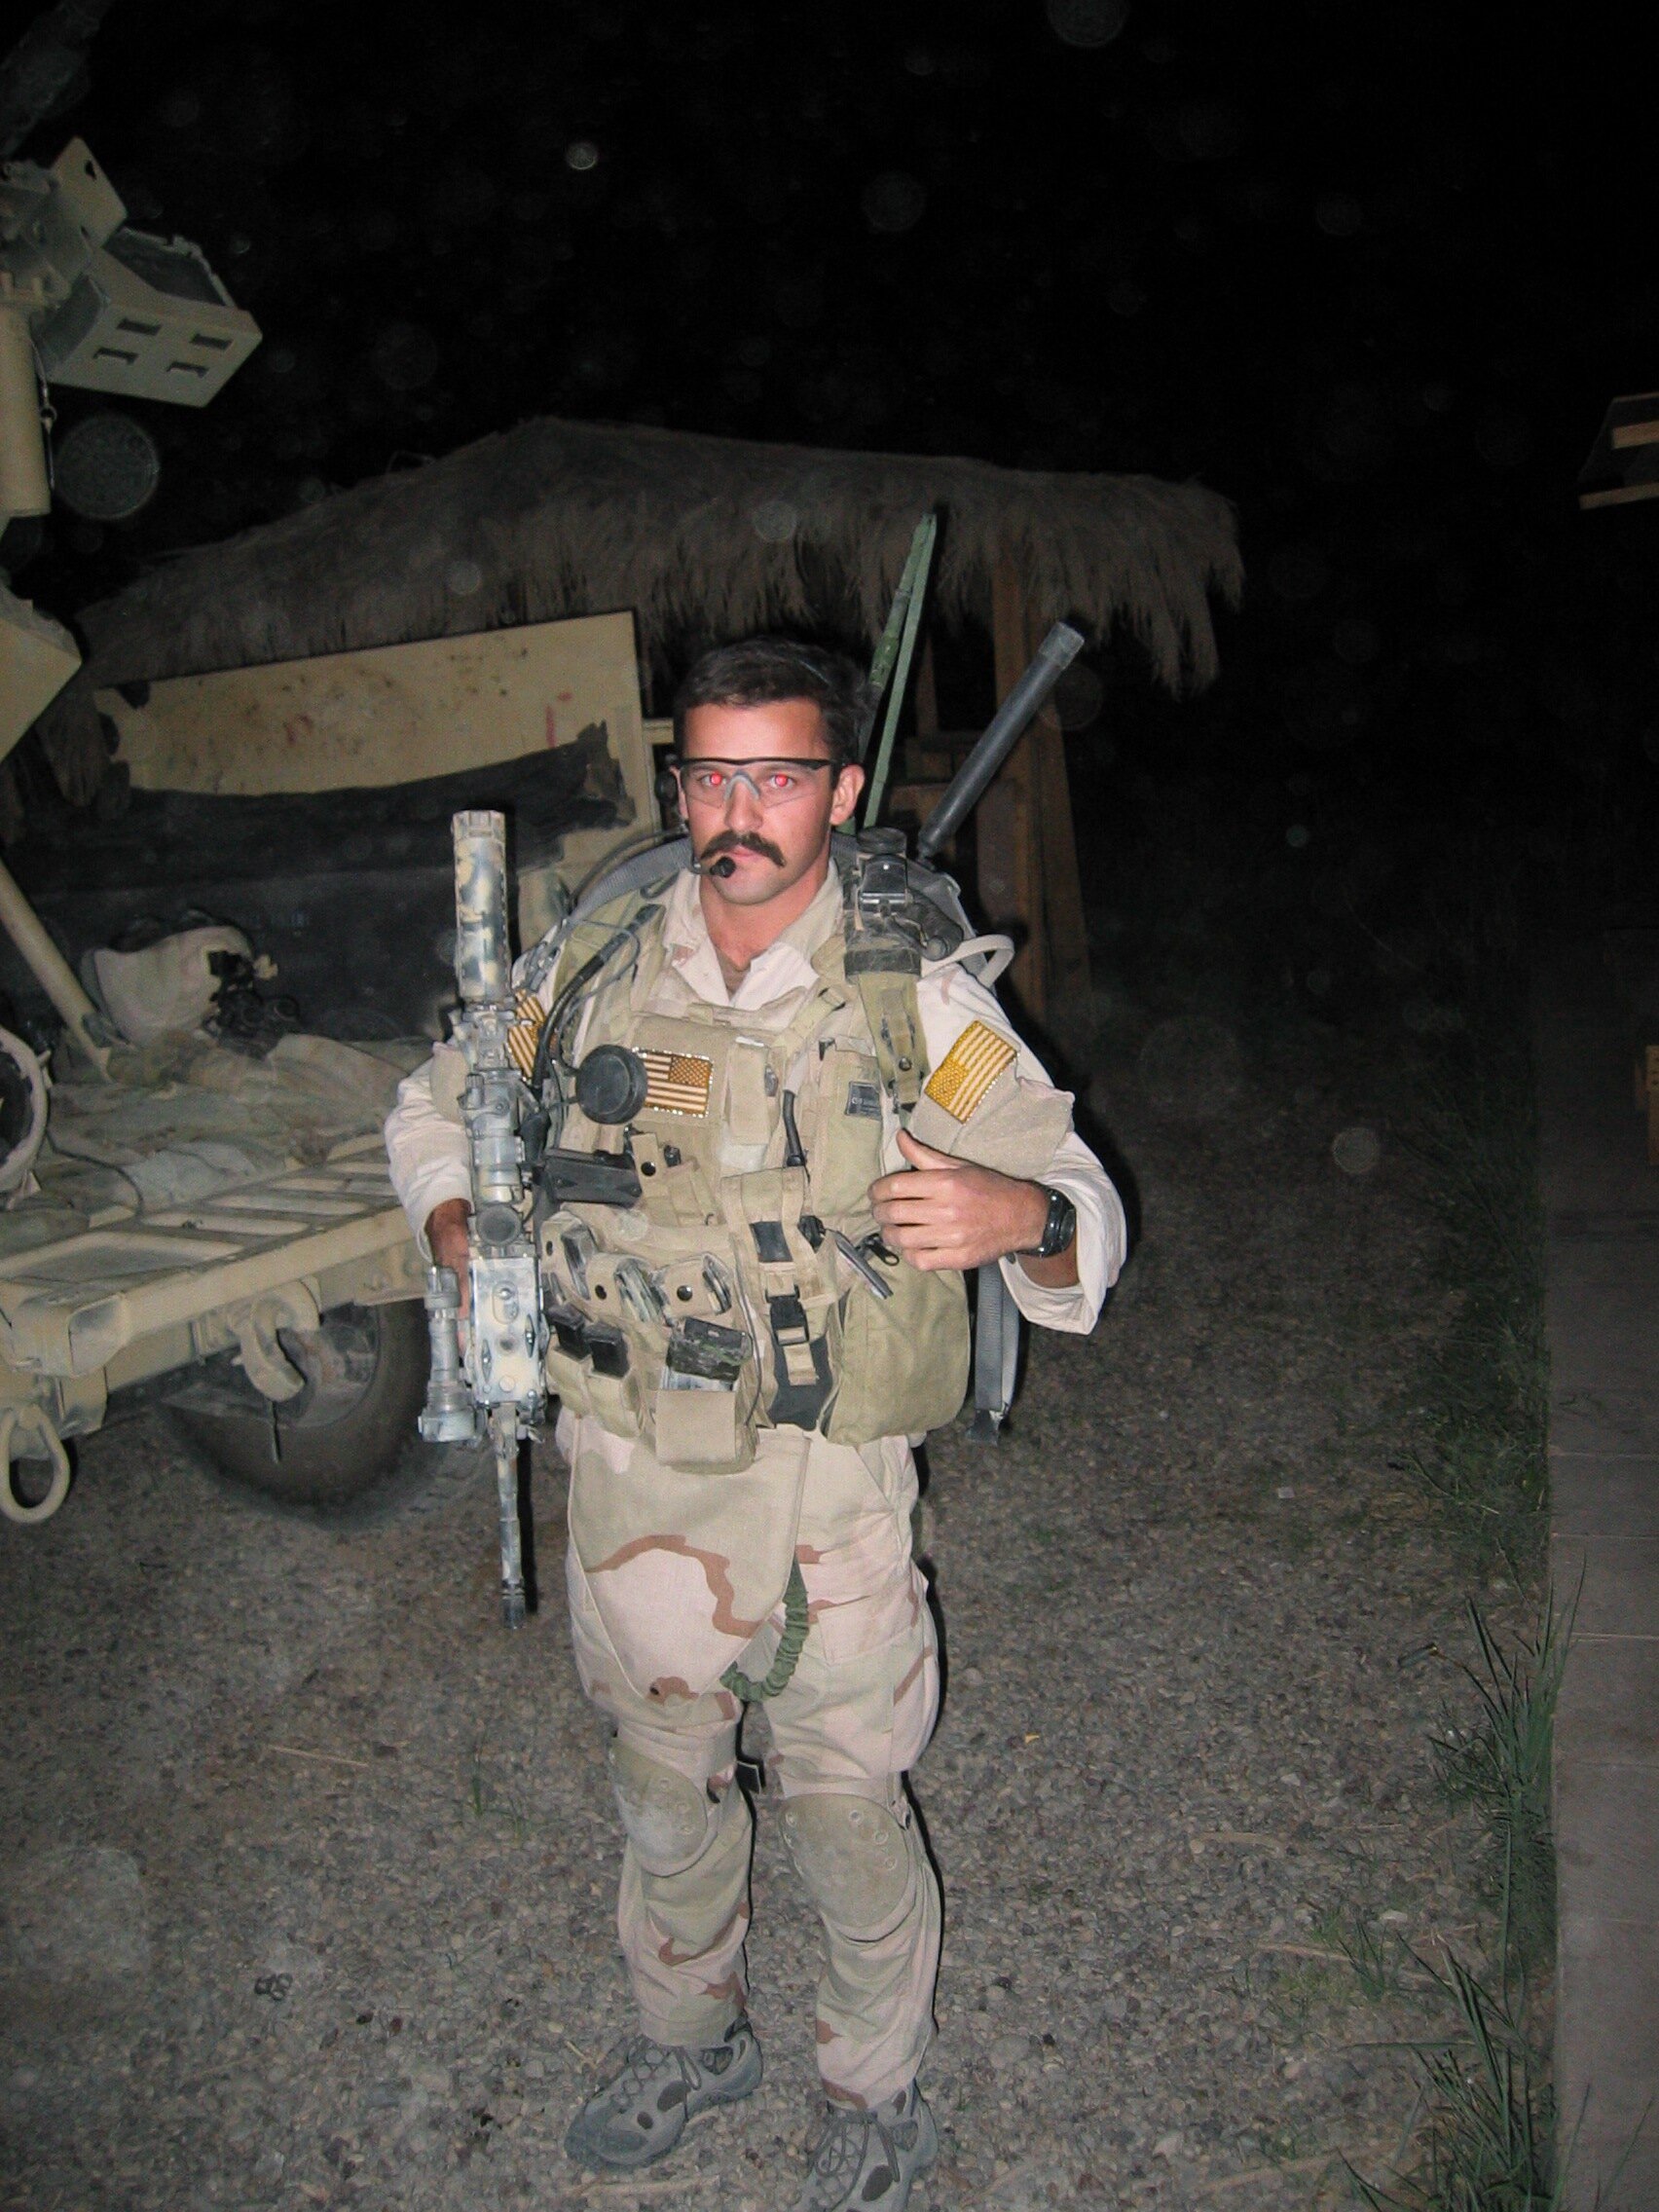 Prepping for a mission with MCSOCOM Det One, Baghdad 2004. Armed with an M-4 and a .45cal Kimber, the radio on my back was my most lethal weapon. pg 289